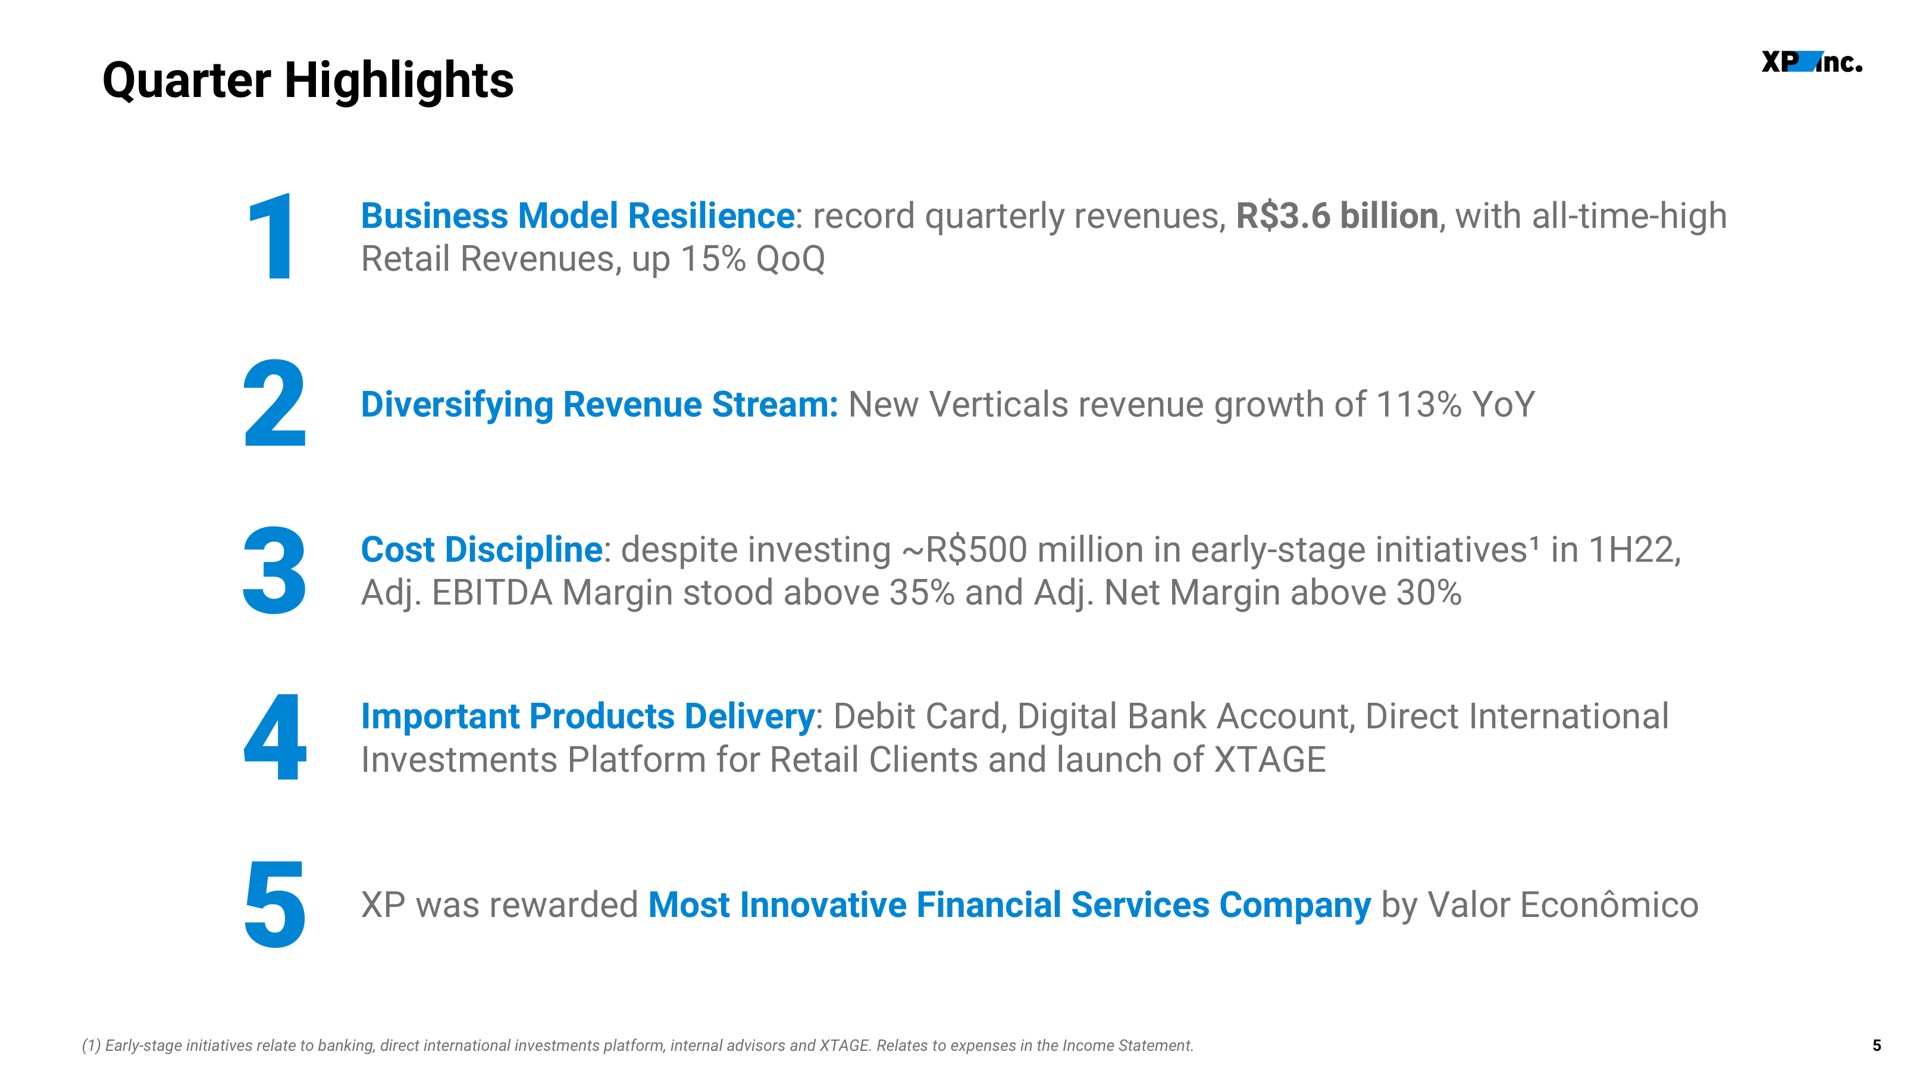 quarter highlights business model resilience record quarterly revenues billion with all time high retail revenues up diversifying revenue stream new verticals revenue growth of yoy cost discipline despite investing million in early stage initiatives in margin stood above and net margin above important products delivery debit card digital bank account direct international was rewarded most innovative financial services company by valor mico | XP Inc